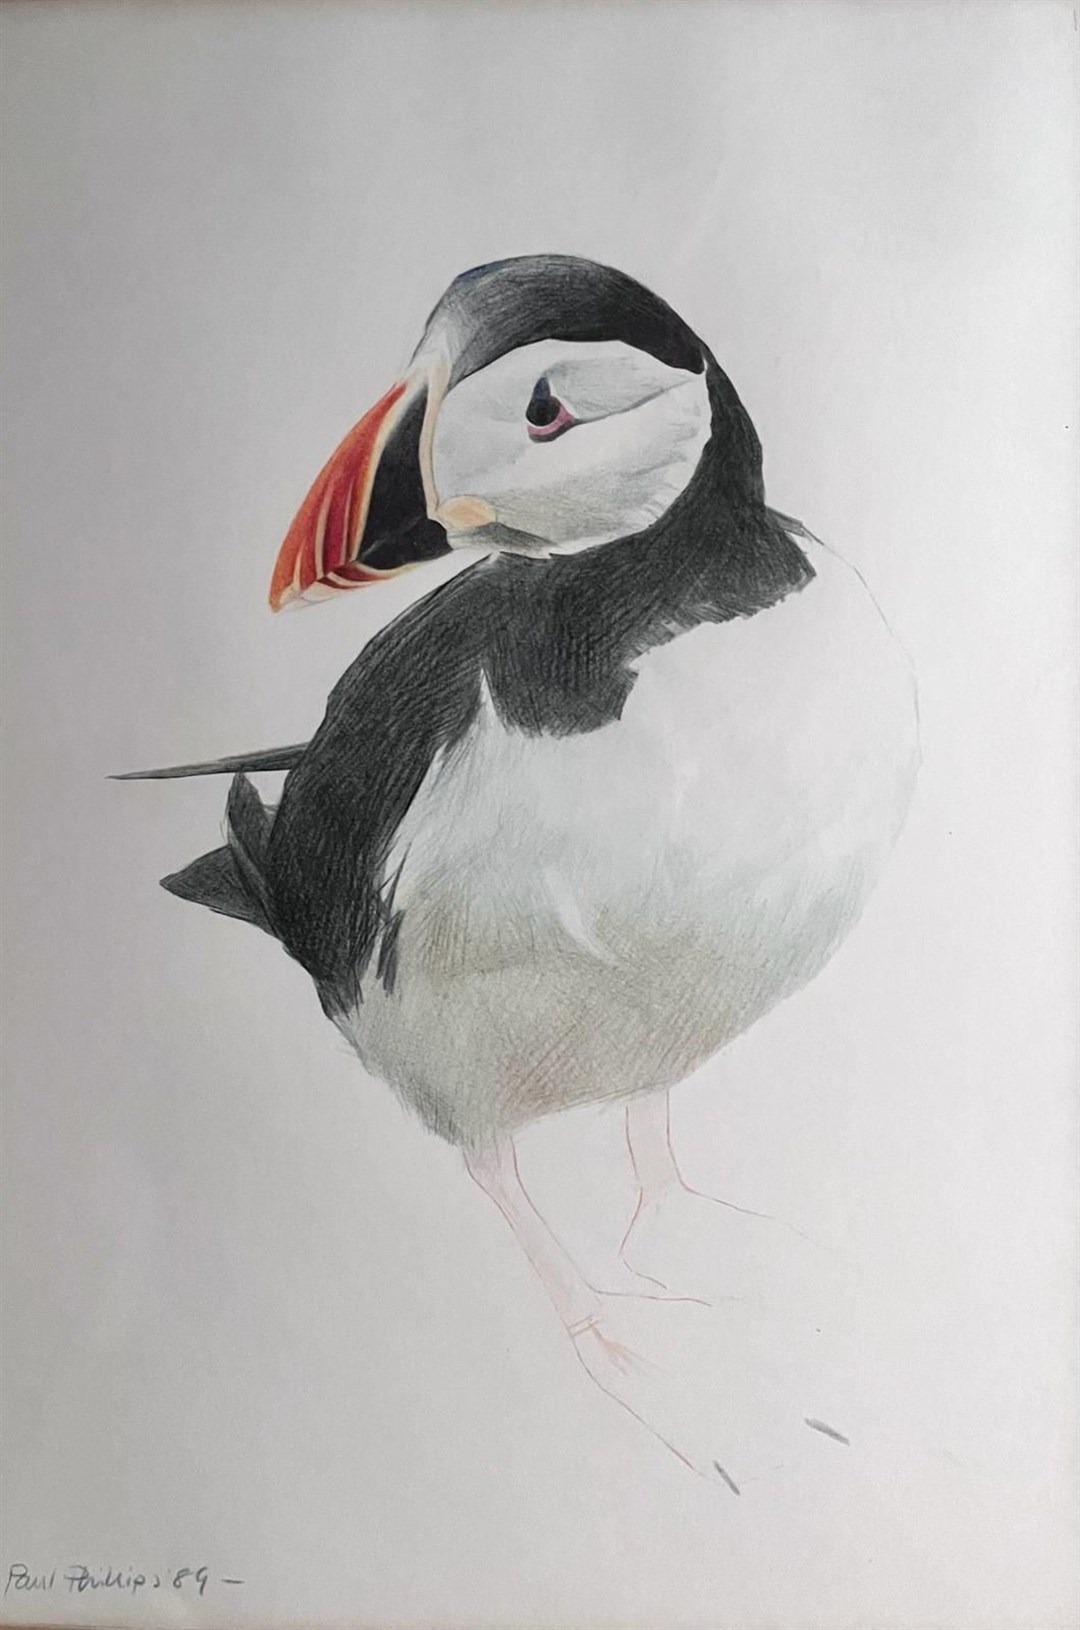 Puffin by Paul Phillips, age 89.